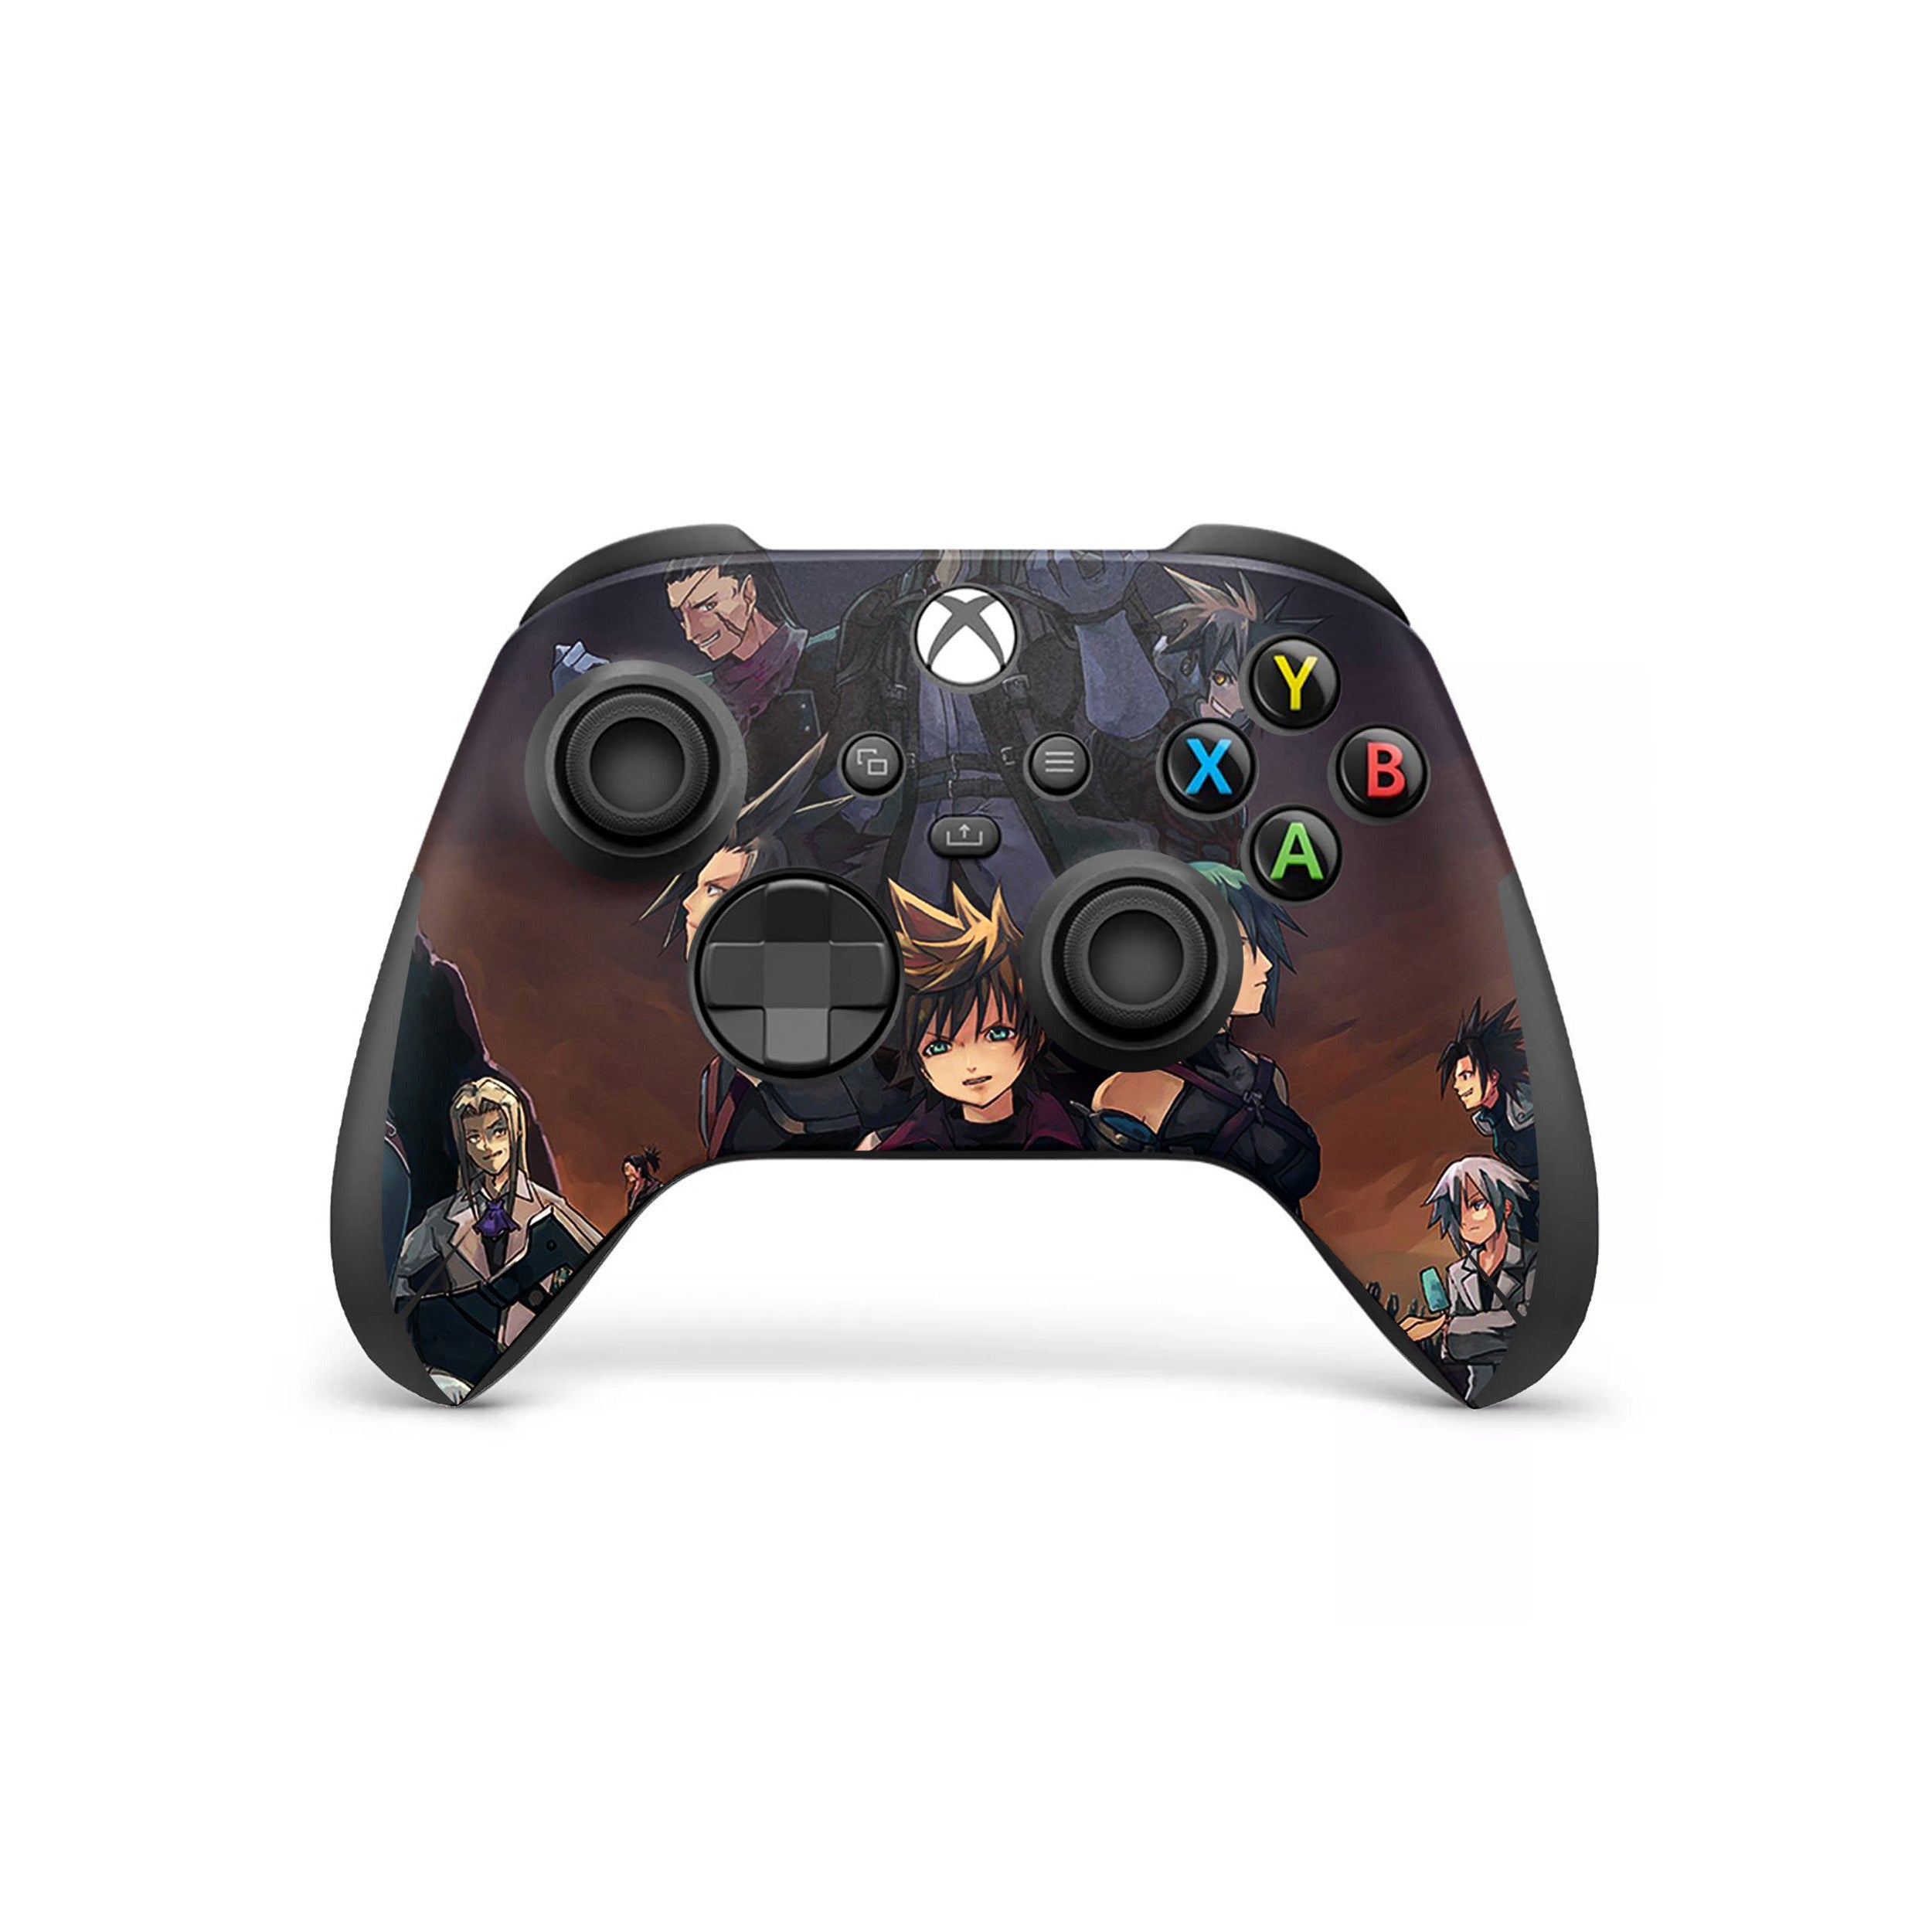 A video game skin featuring a Kingdom Hearts design for the Xbox Wireless Controller.